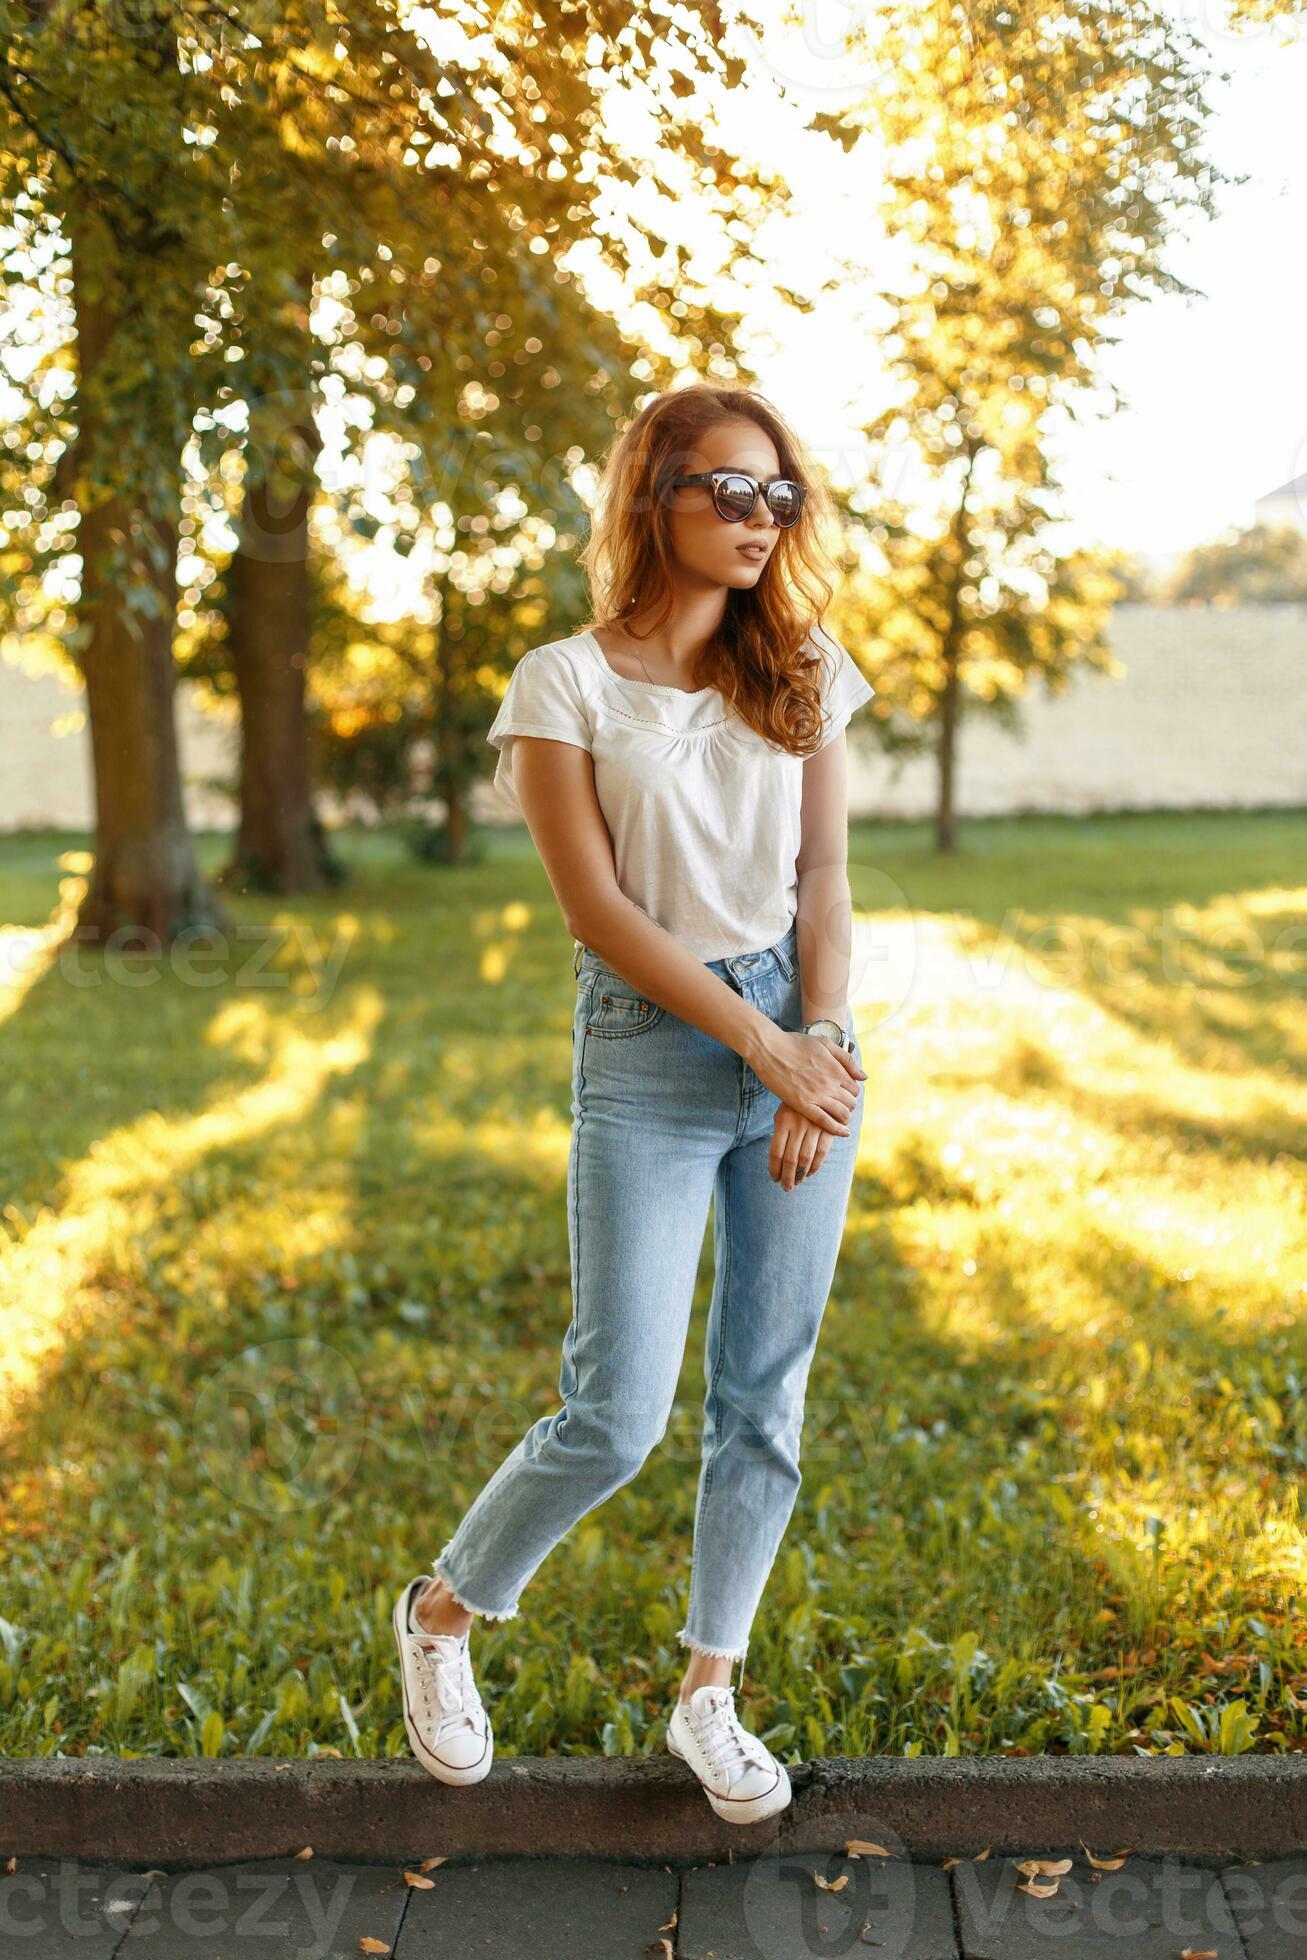 Smiling Woman in Shirt and Jeans Posing near Stone Wall · Free Stock Photo-sonthuy.vn